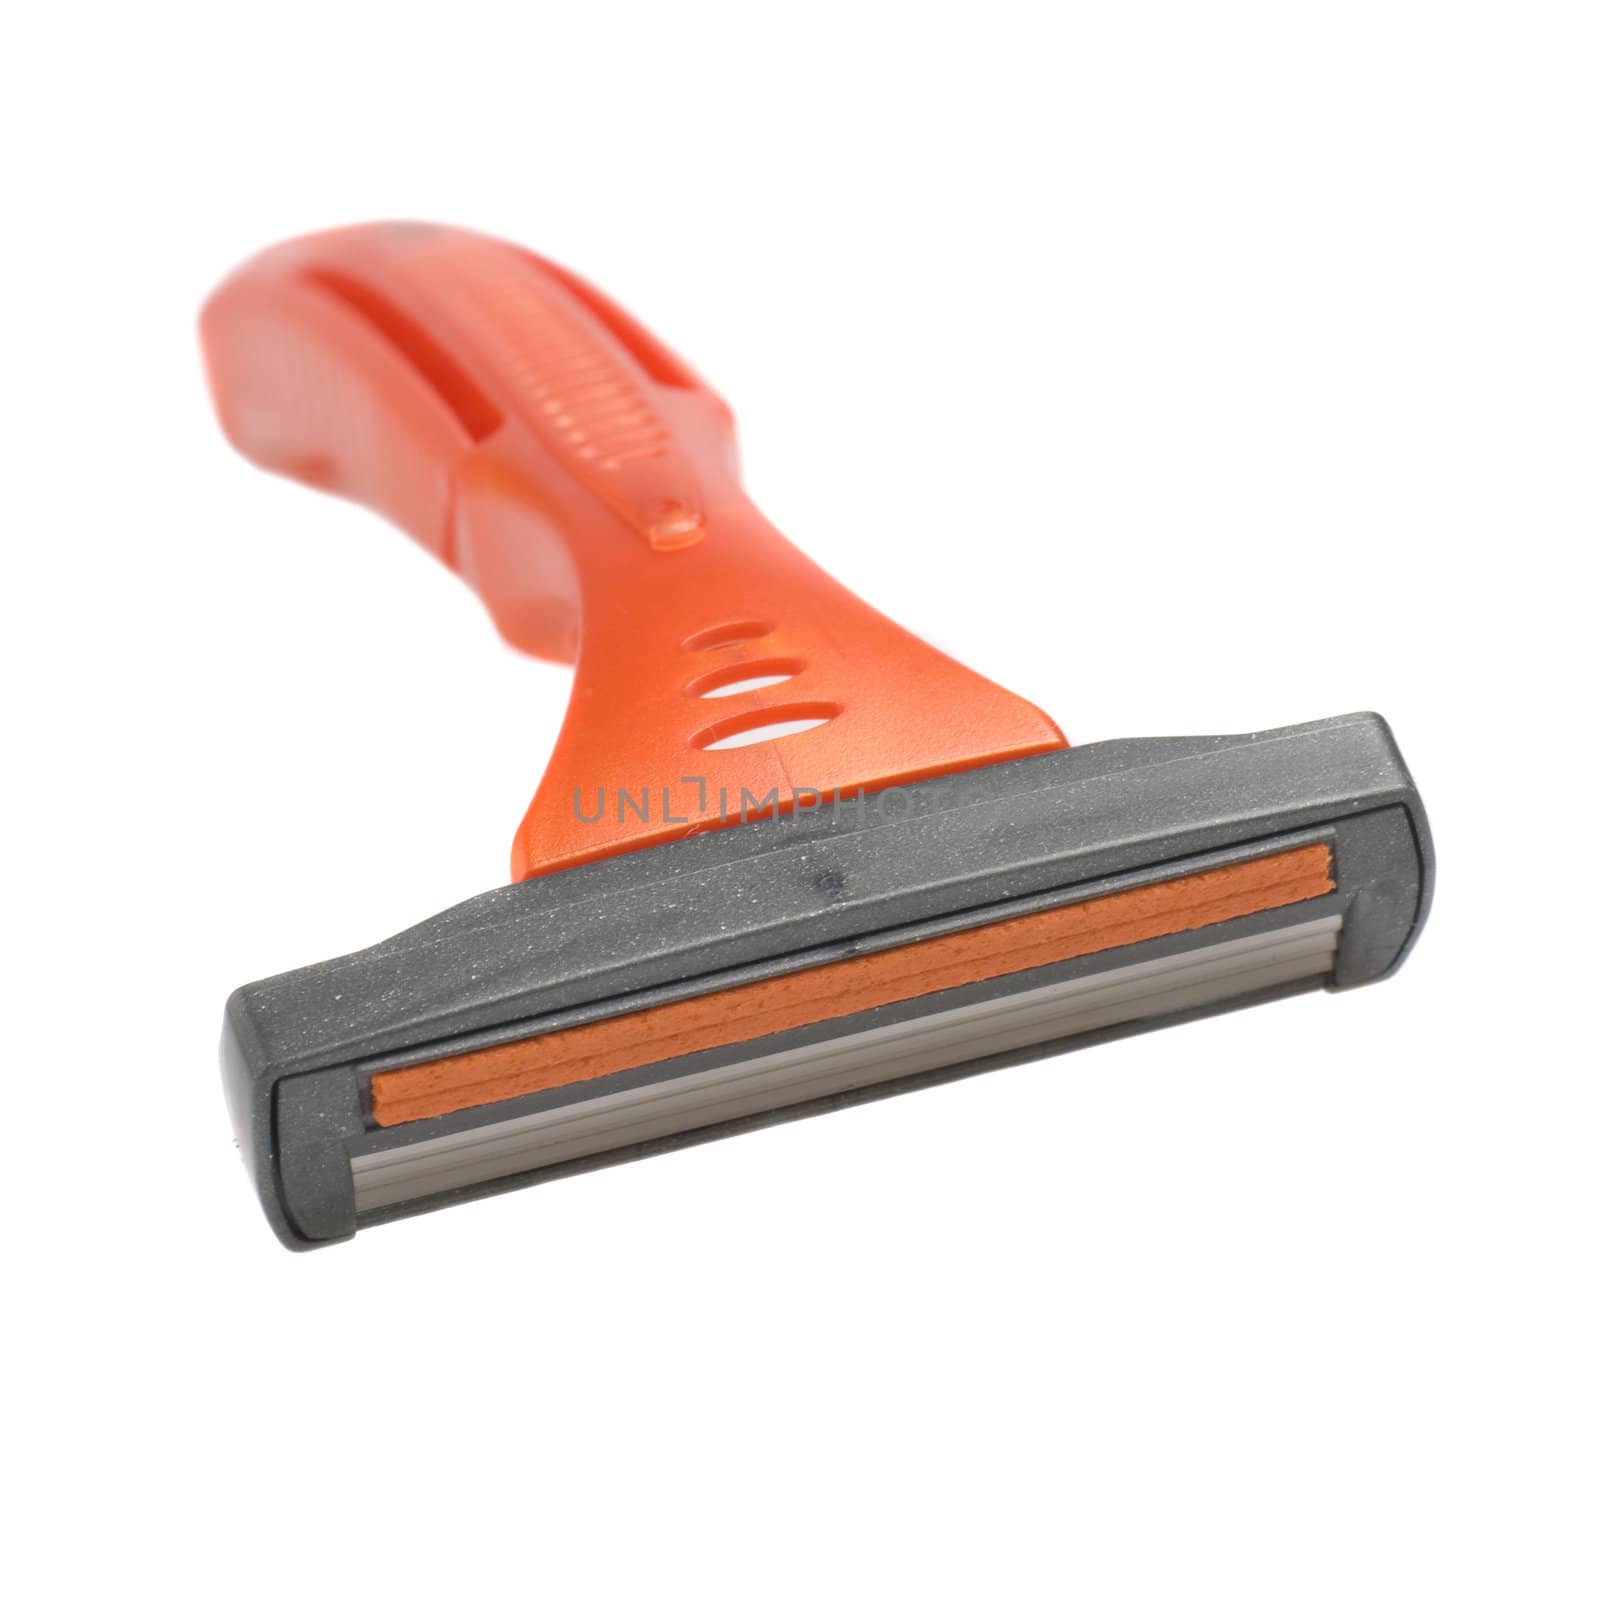 The disposable razor. The shaving machine tool isolated on a white background